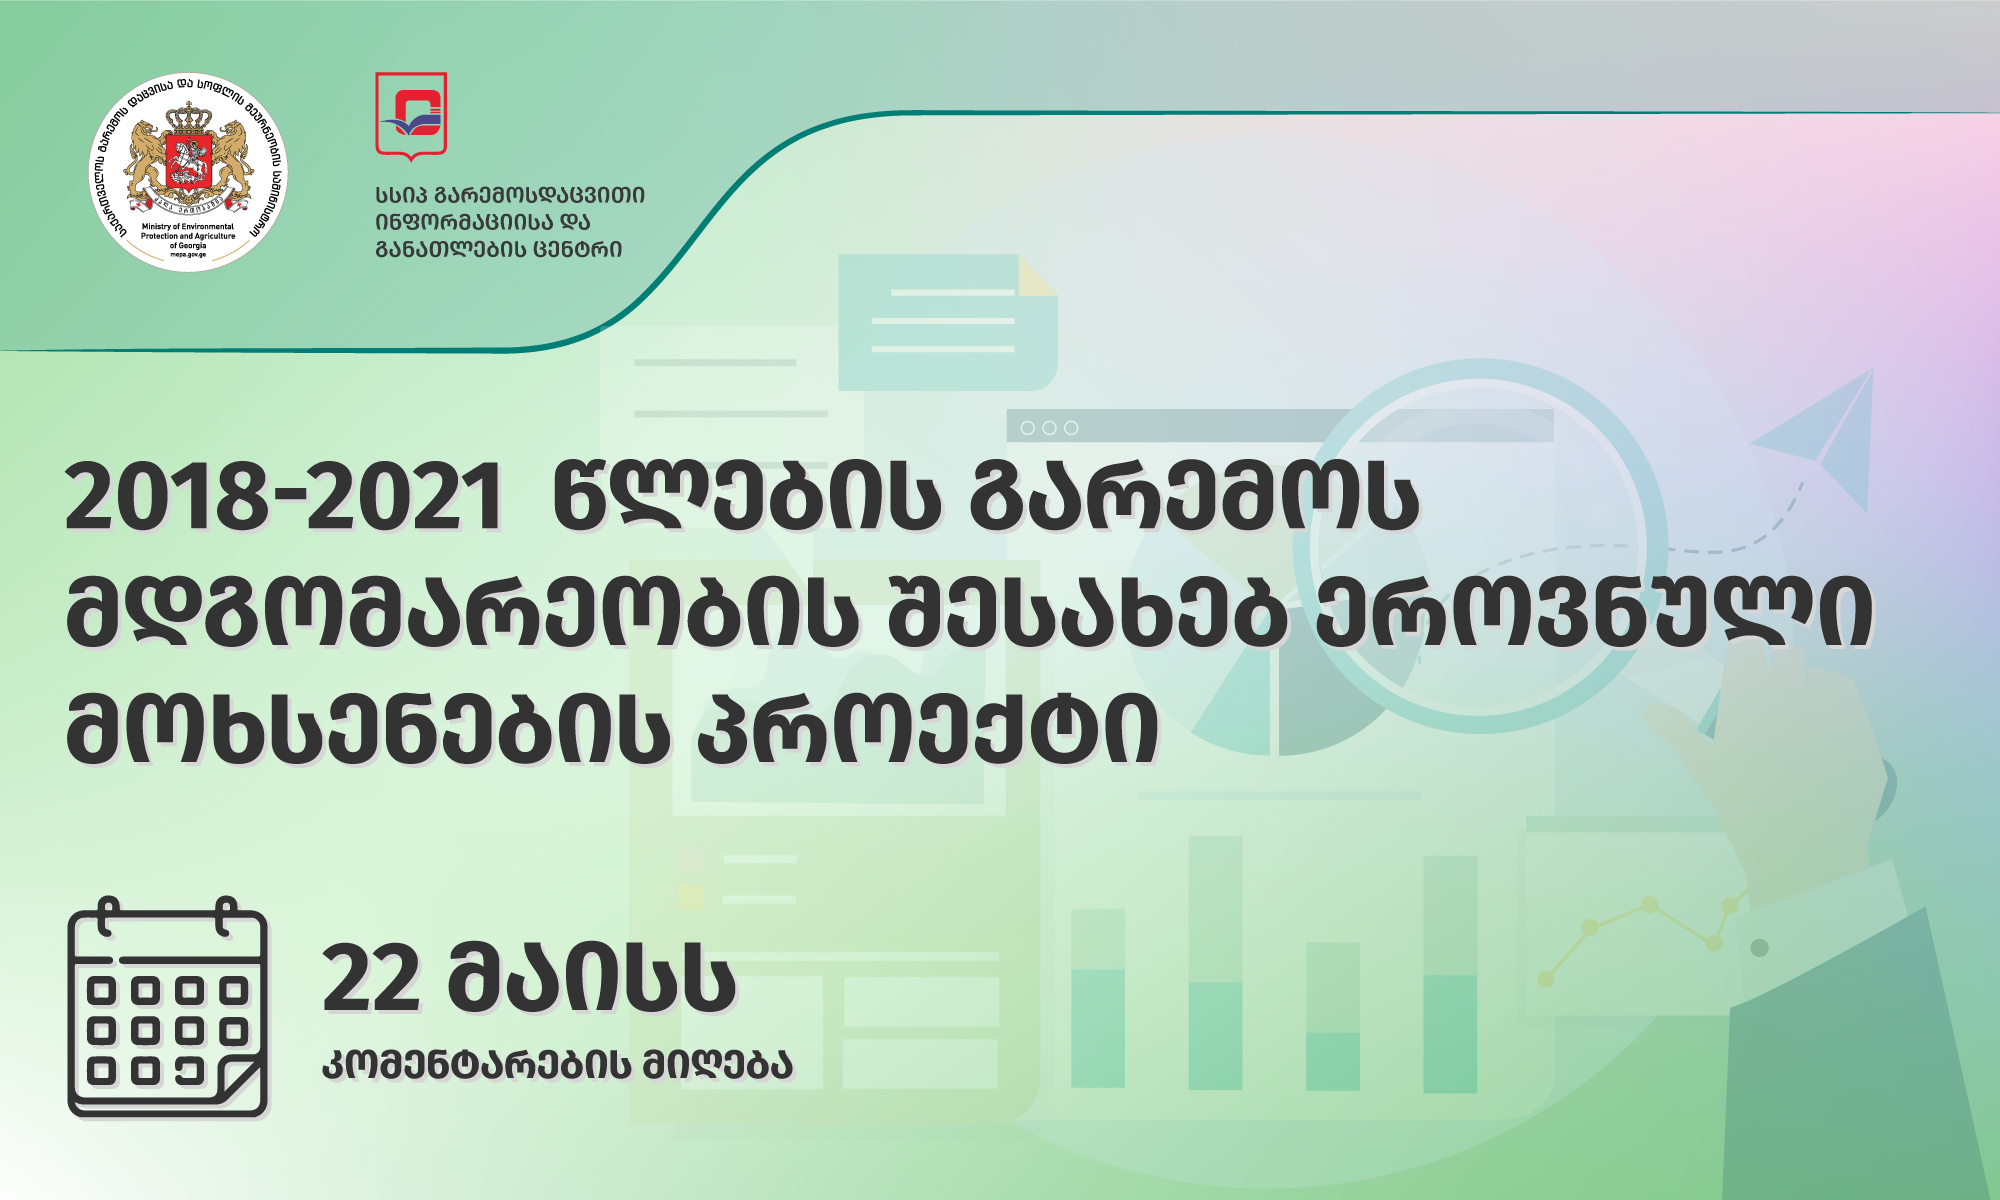 THE PROJECT OF A NATIONAL REPORT ON ENVIRONMENTAL CONDITIONS IN 2018-2021